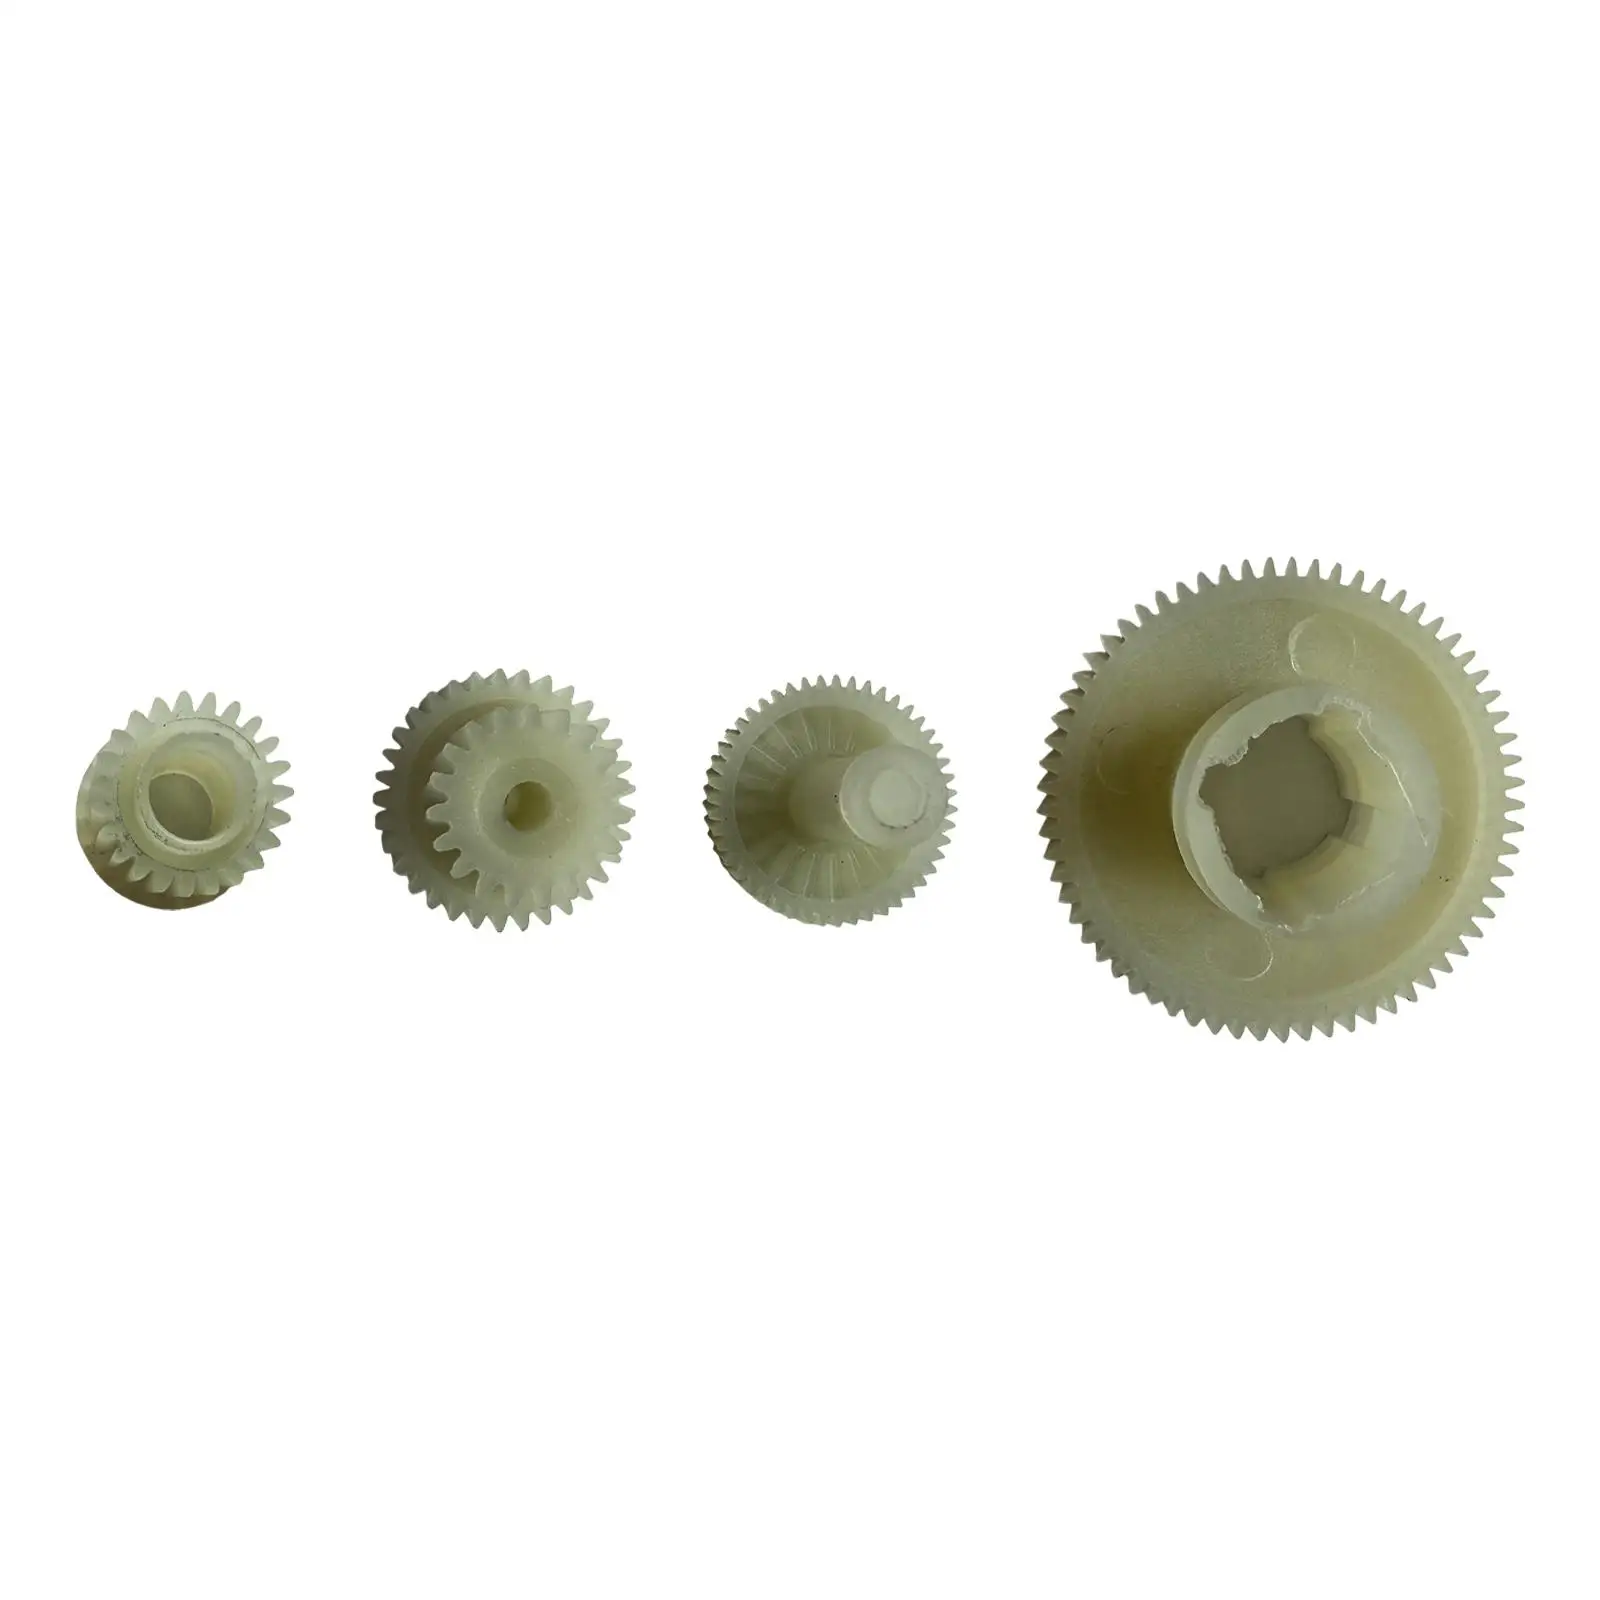 Parking Brake Actuator Repair Gears Replace Parts Durable High Quality for Land Rover Range Rover Sport Discovery 3 4